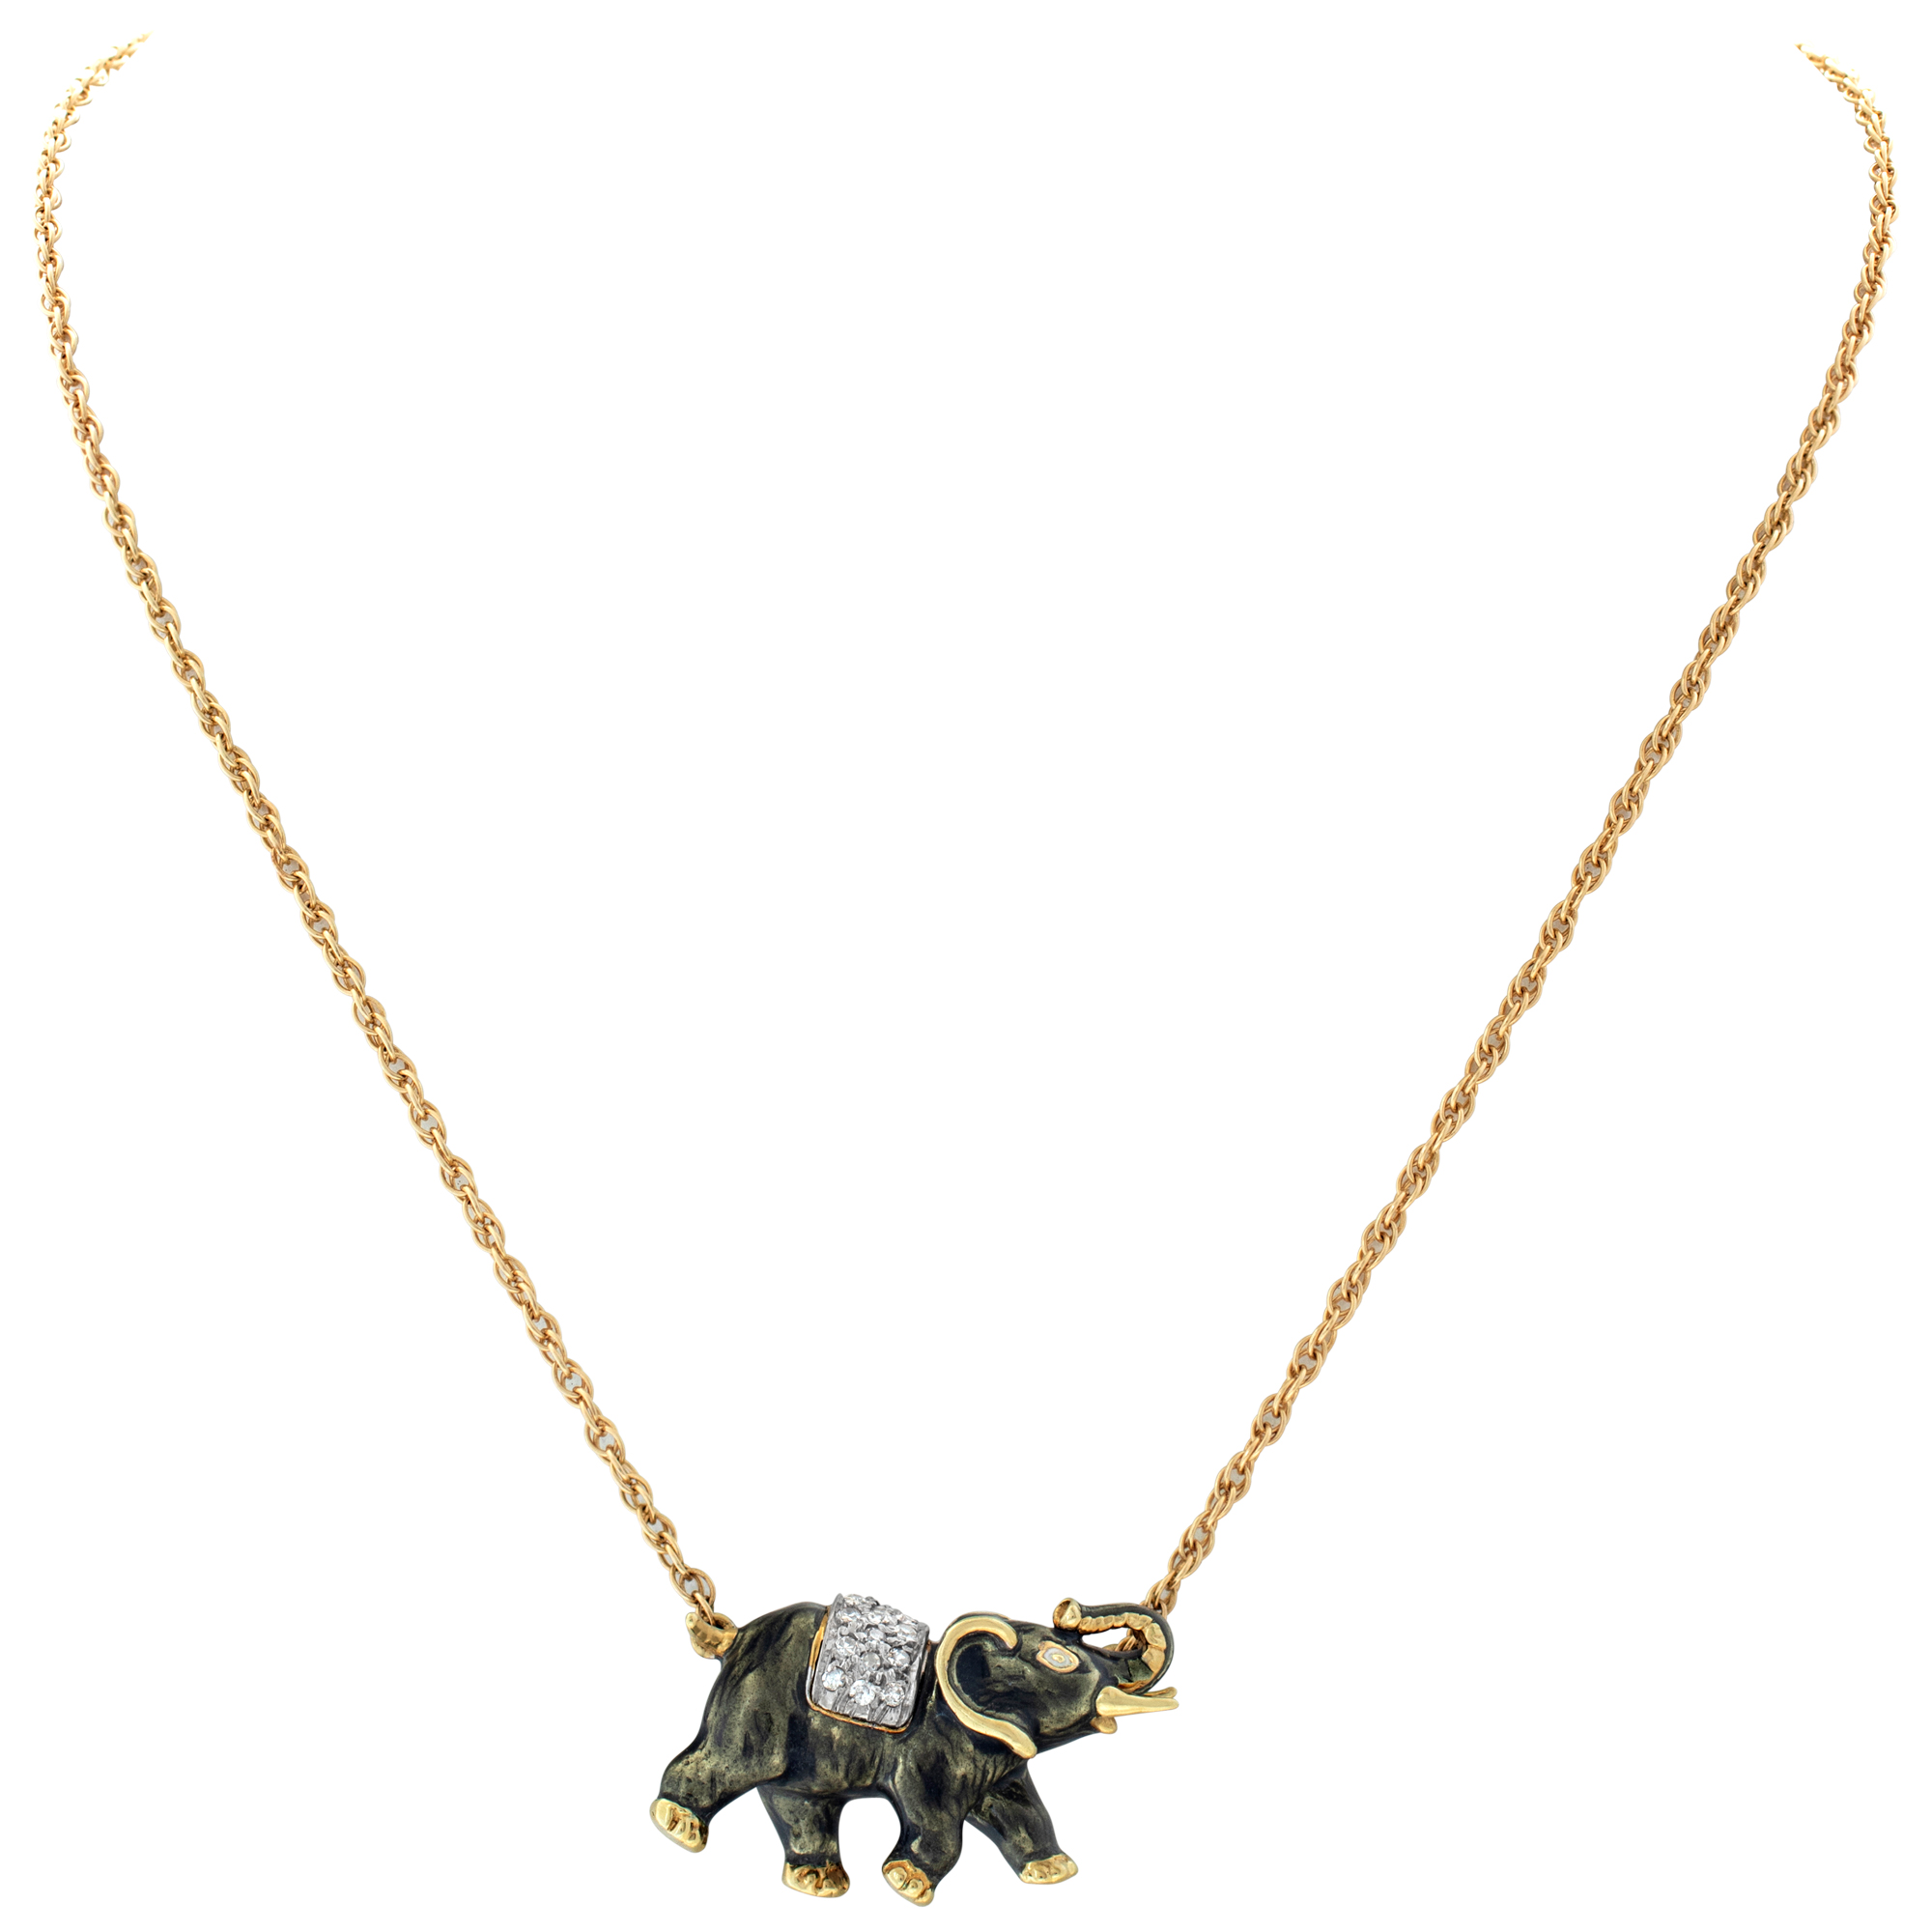 An Elephant necklace in 14k image 1